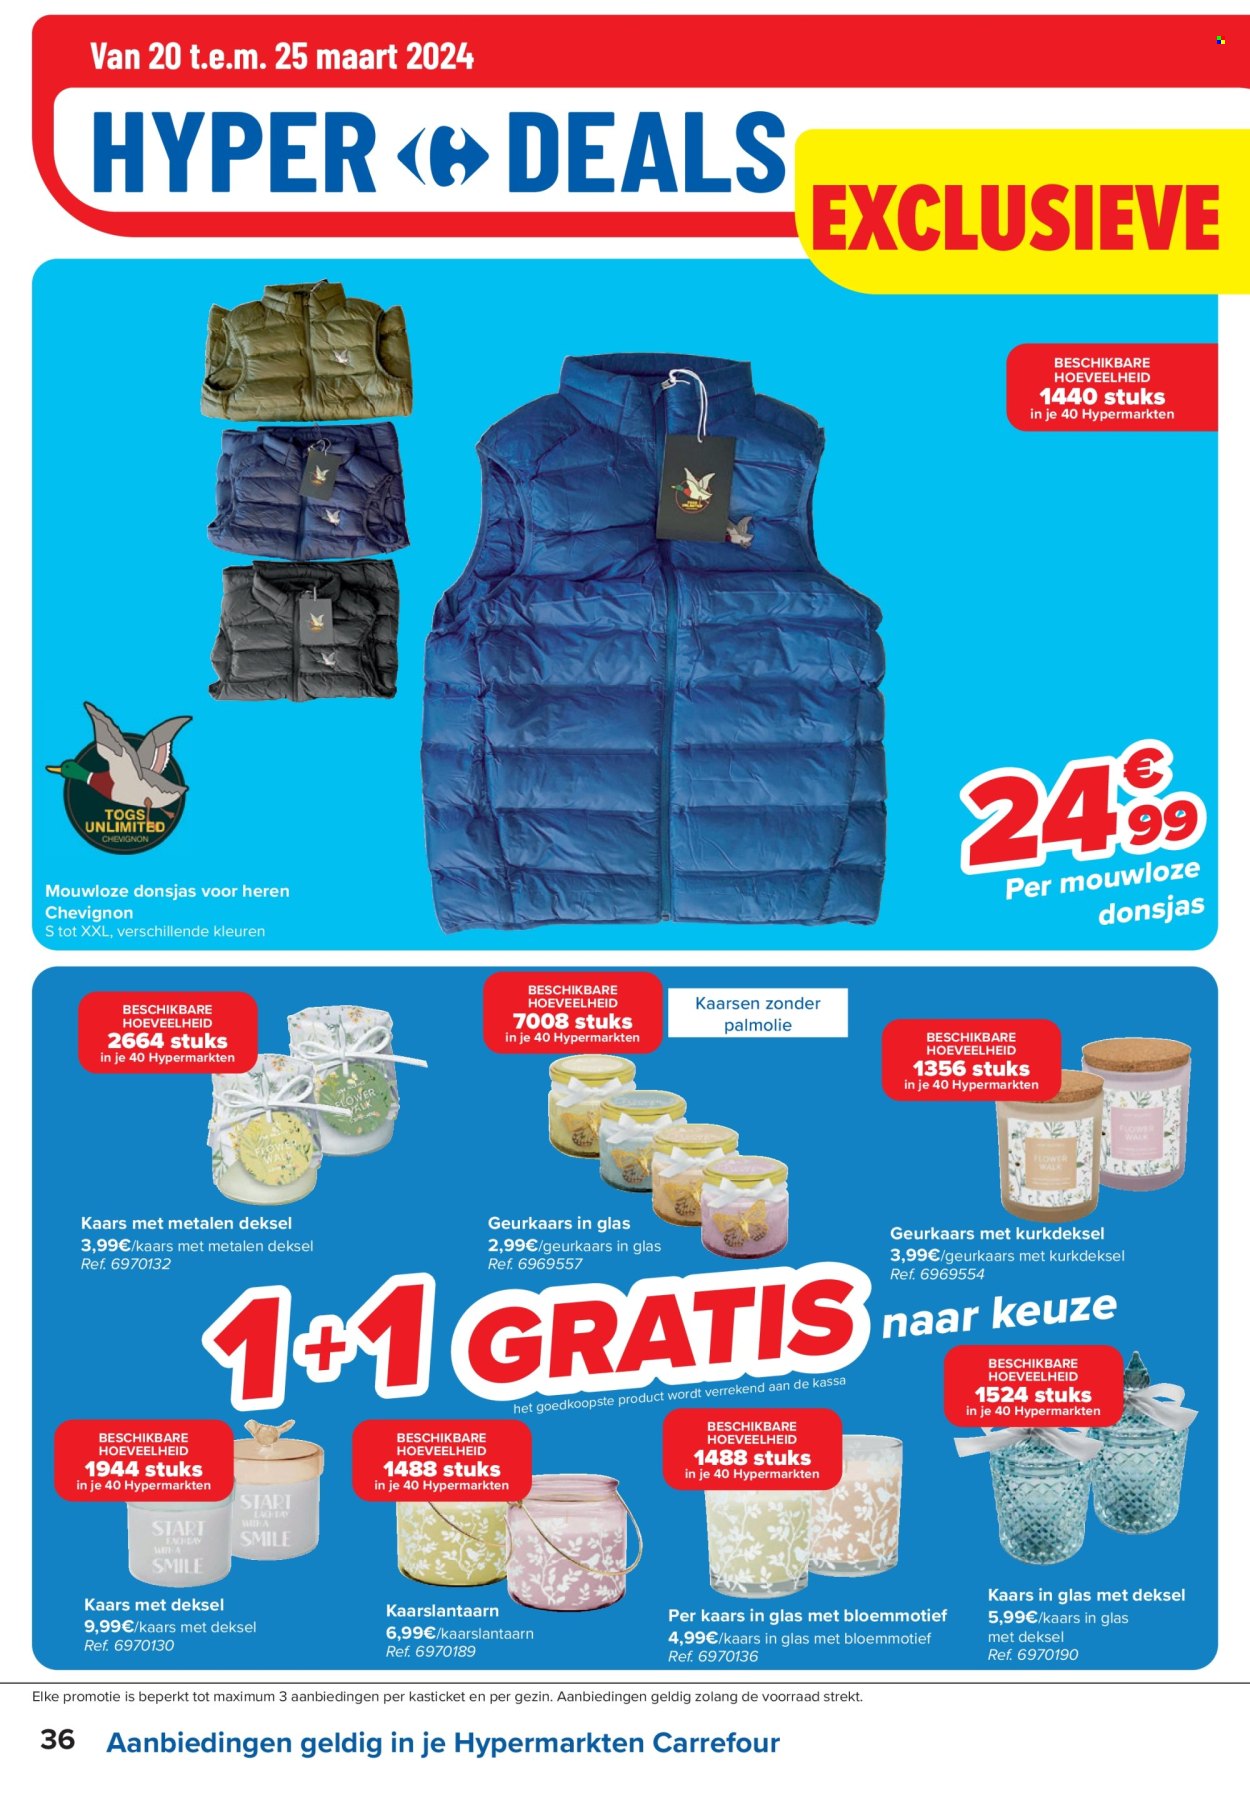 Catalogue Carrefour hypermarkt - 20.3.2024 - 2.4.2024. Page 36.